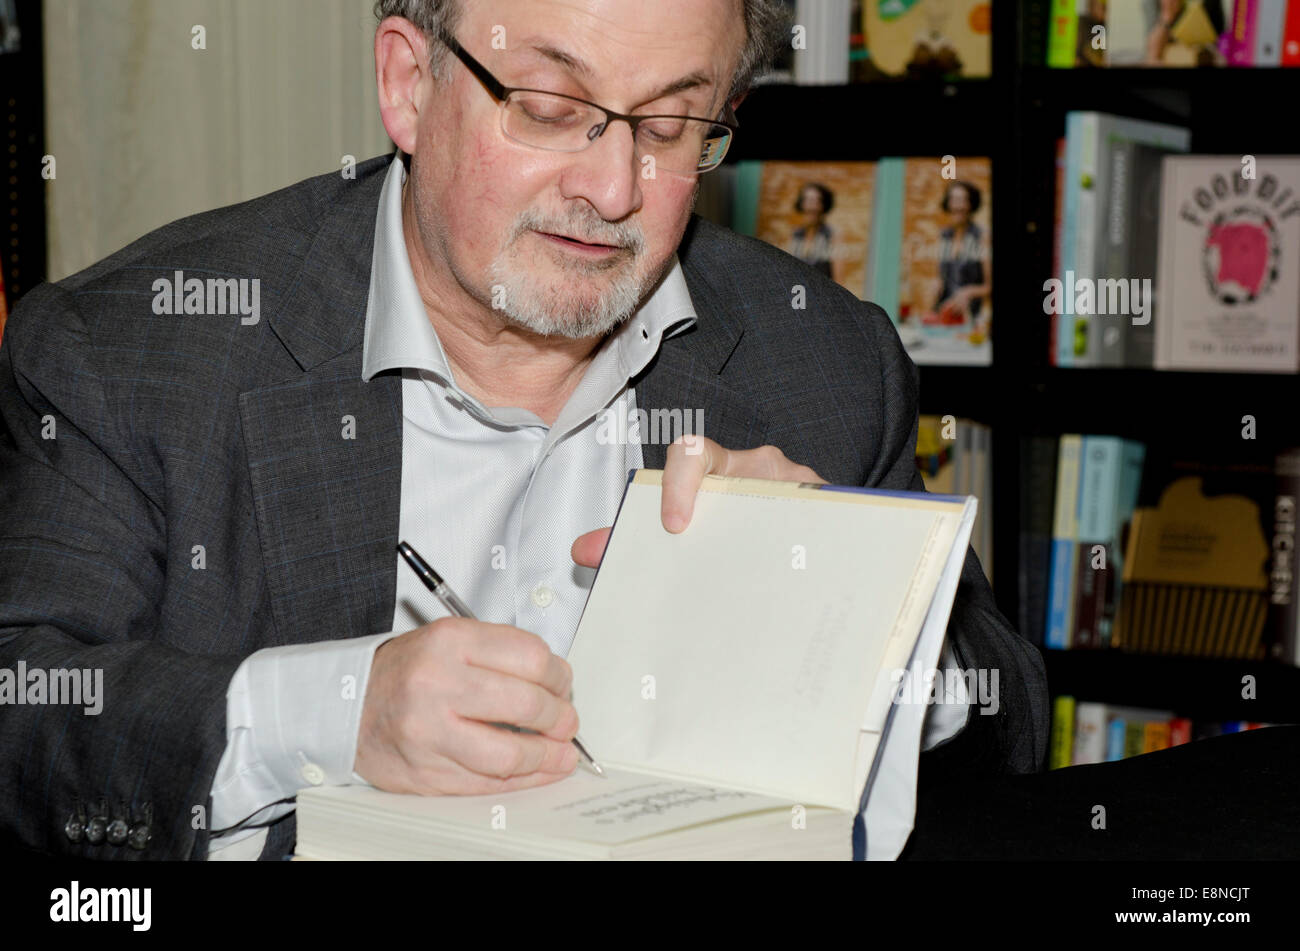 Salman  Rushdie, novelist,  Man Booker Prize winner and writer of Midnight's Children and The Satanic Verses signs books at the Cheltenham Literary Festival 10th October, 2014  Gloucestershire uk Credit:  Prixnews/Alamy Live News Stock Photo